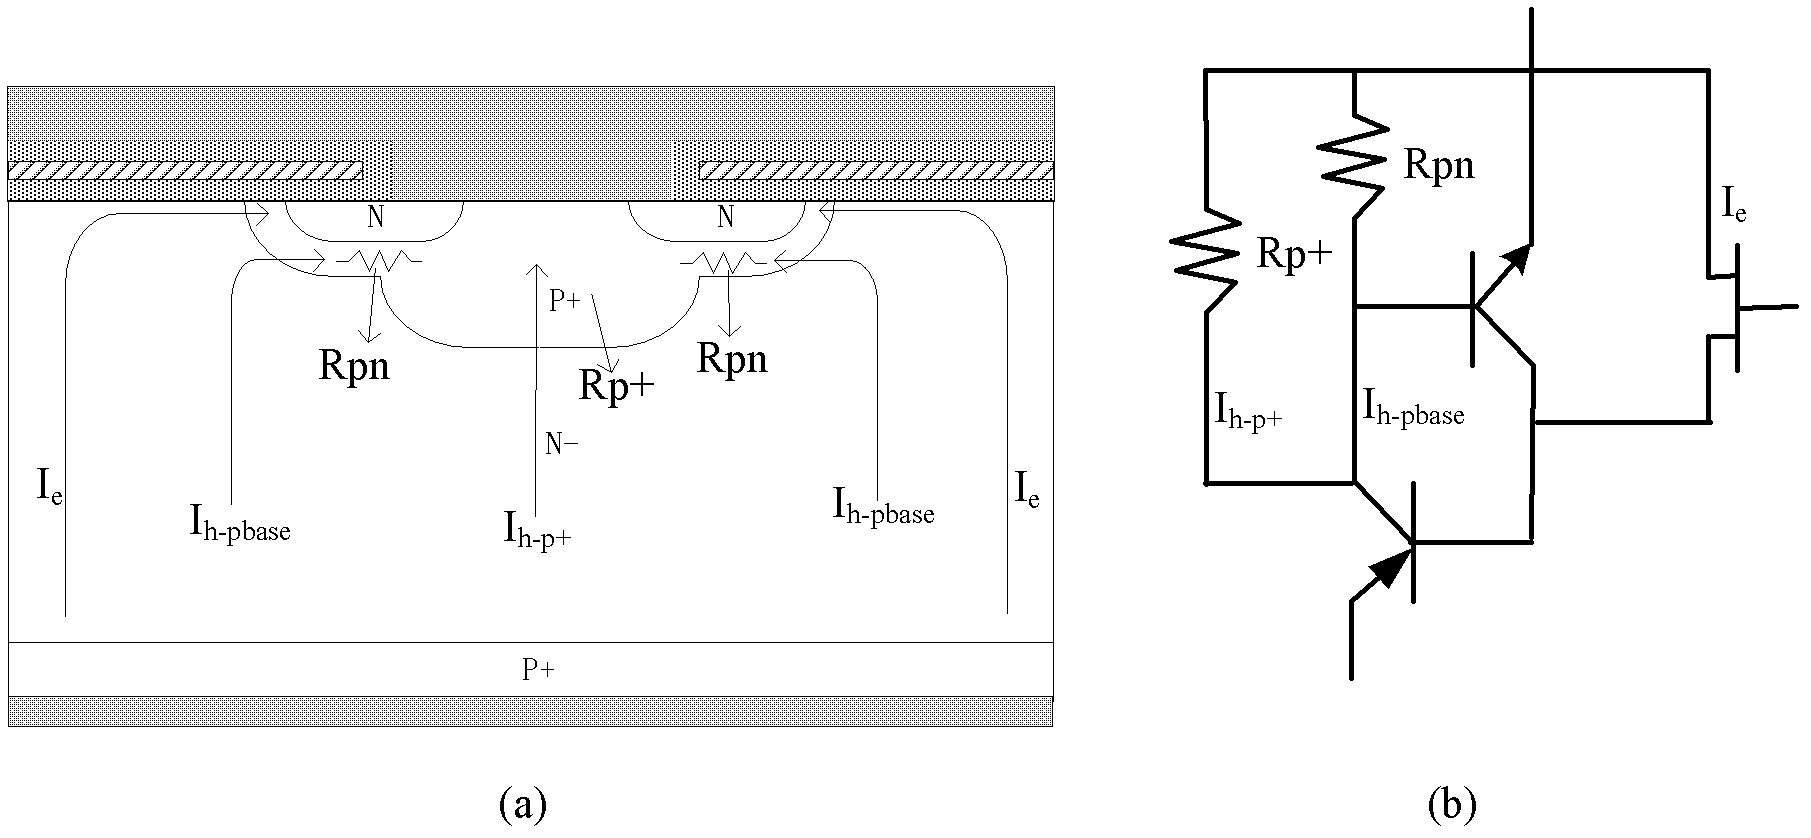 Insulated gate bipolar transistor (IGBT) with anti-latchup effect